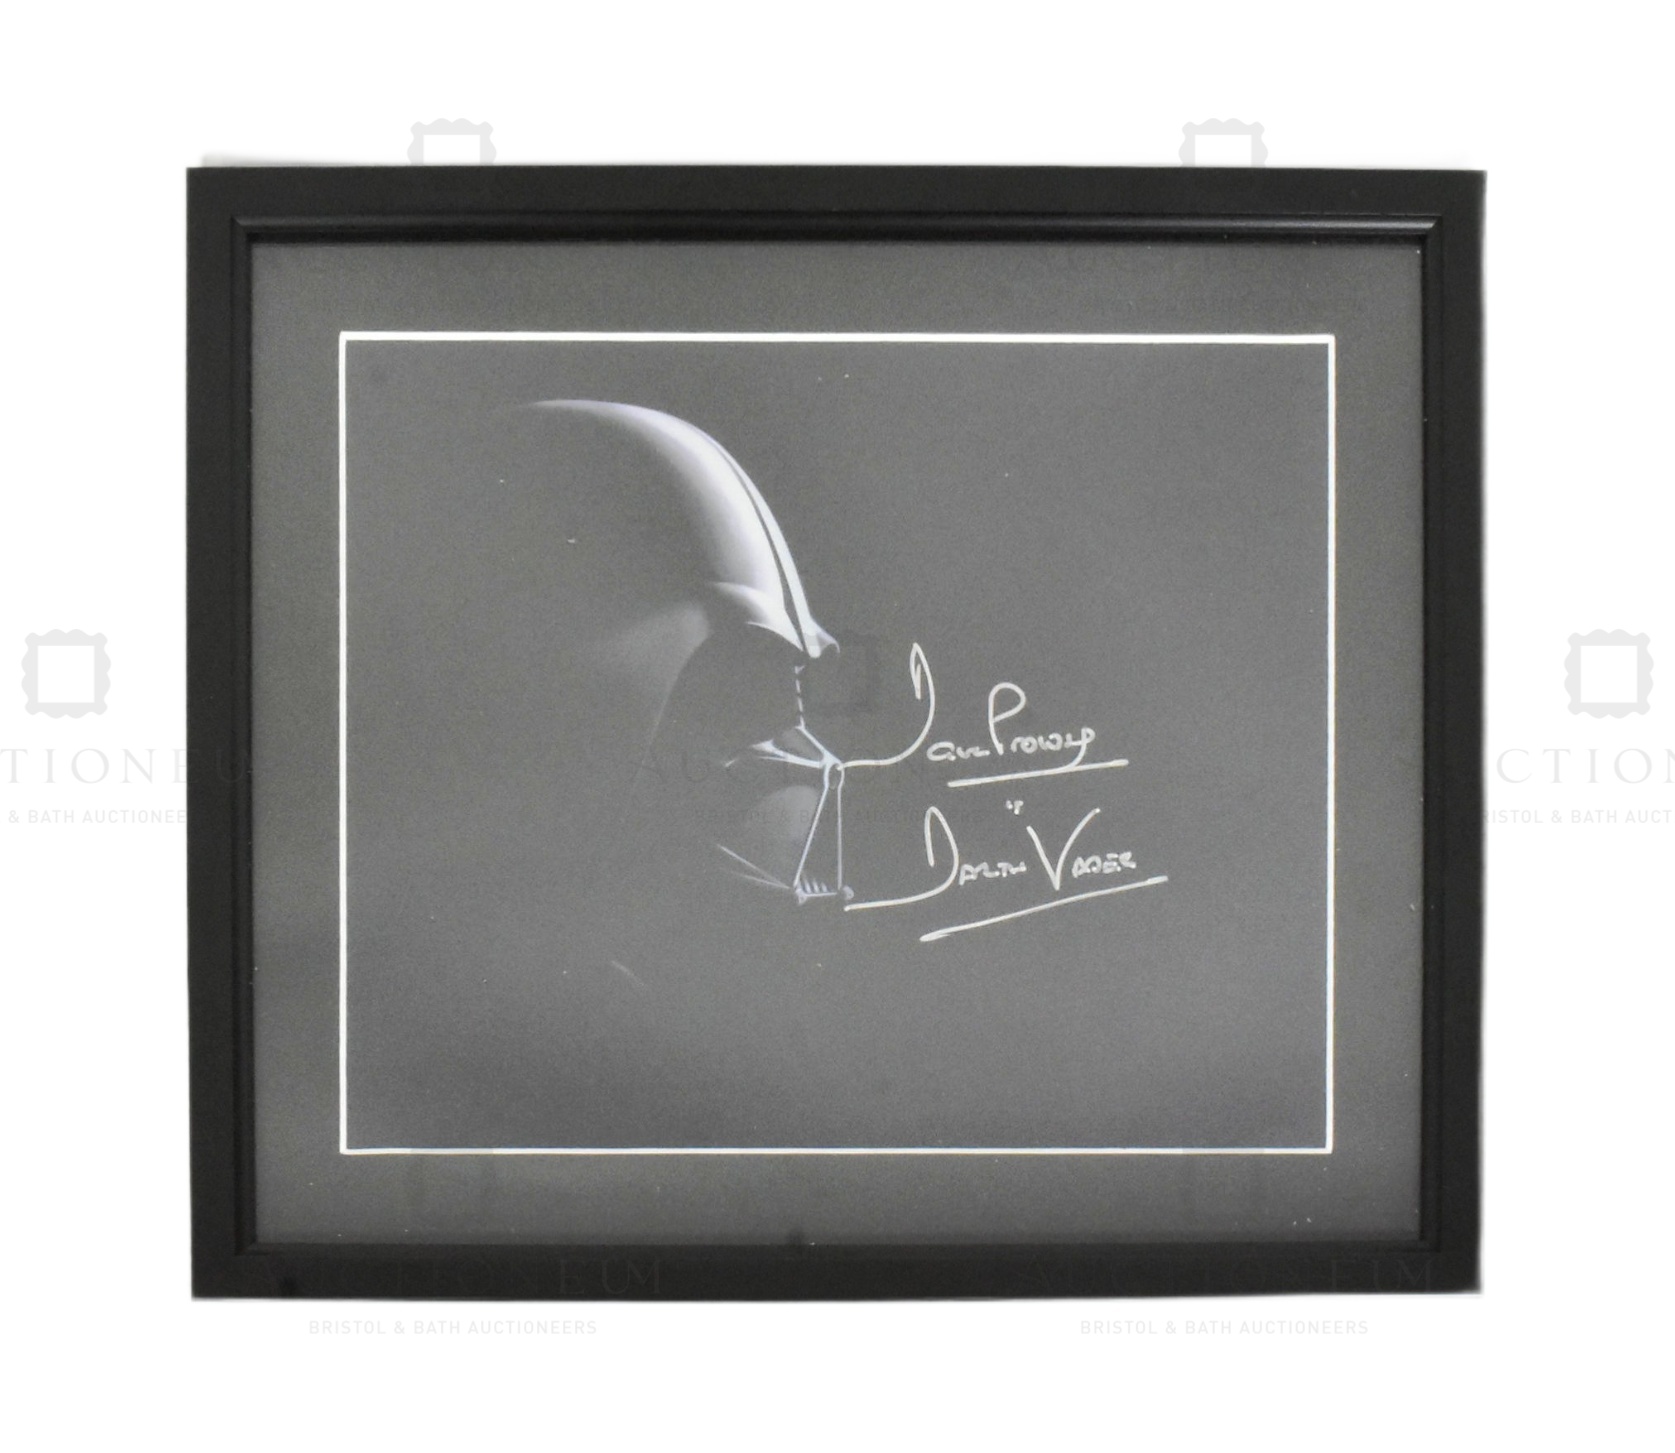 STAR WARS - DAVE PROWSE DARTH VADER - SIGNED 8X10"